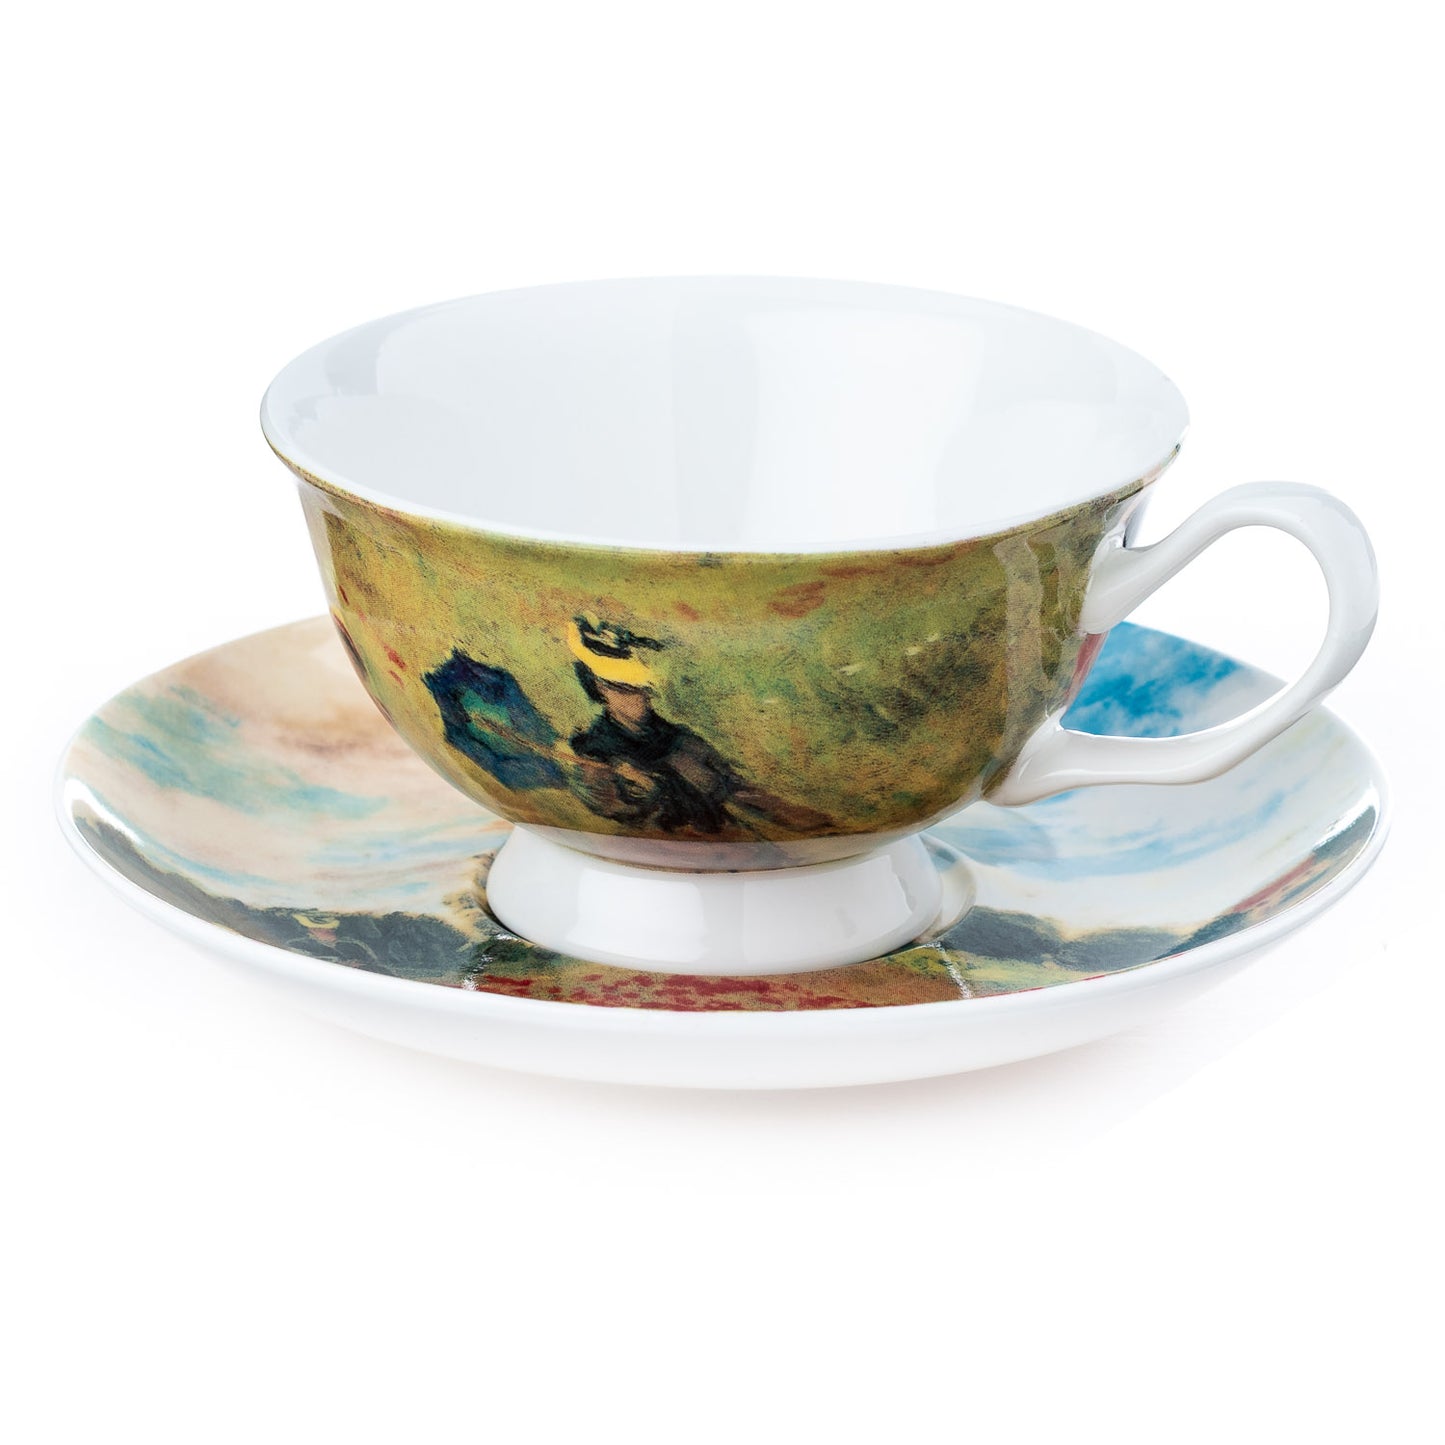 Monet 'Poppies' Cup & Saucer